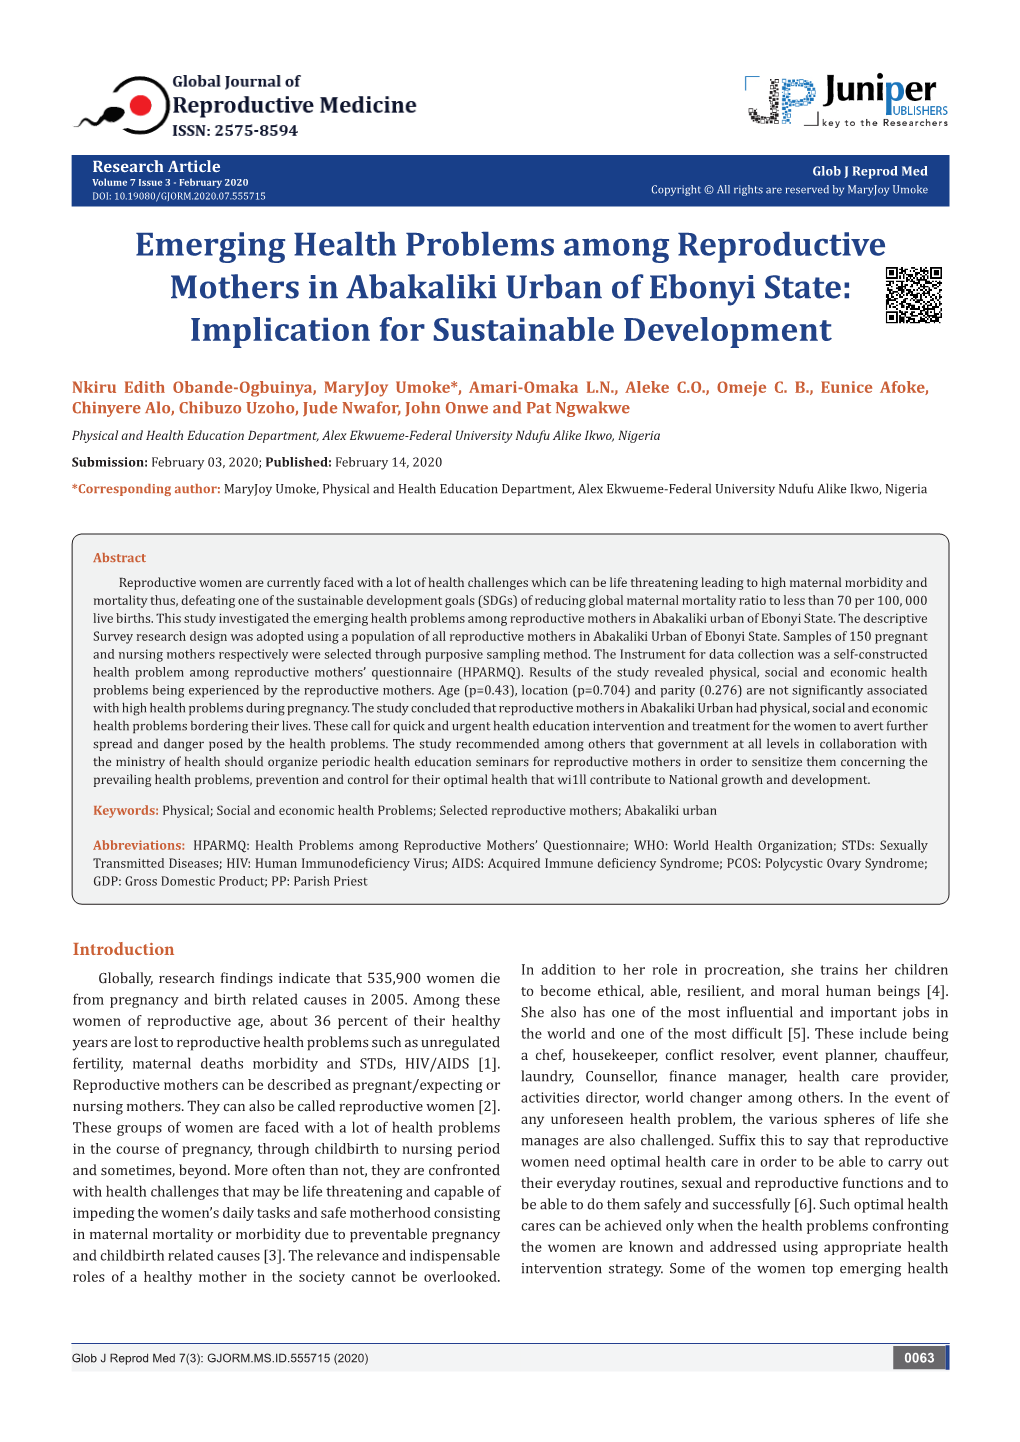 Emerging Health Problems Among Reproductive Mothers in Abakaliki Urban of Ebonyi State: Implication for Sustainable Development